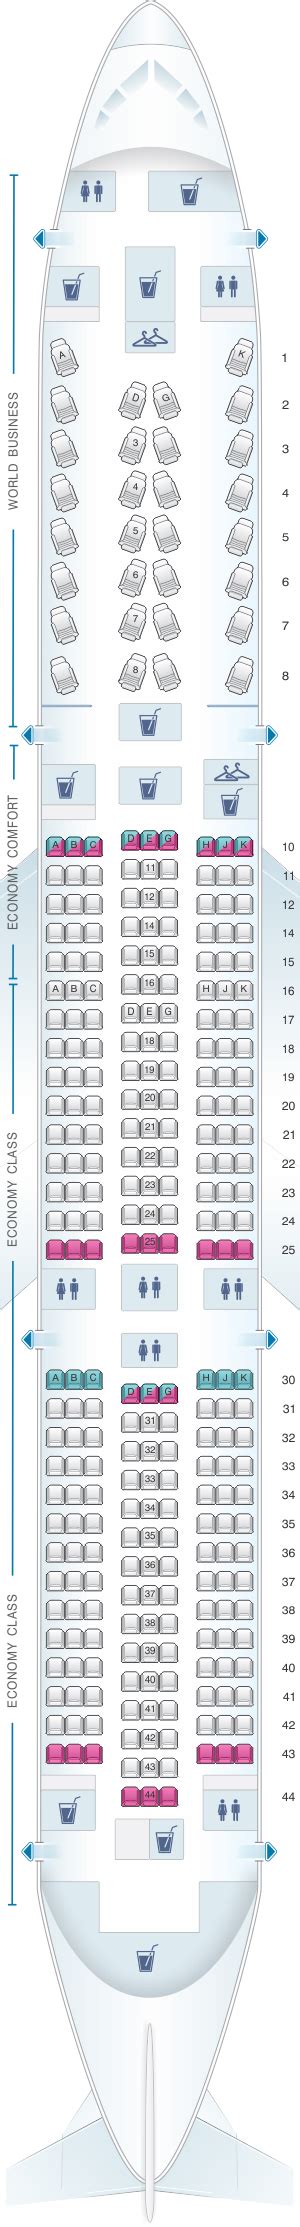 boeing 787 klm seating chart